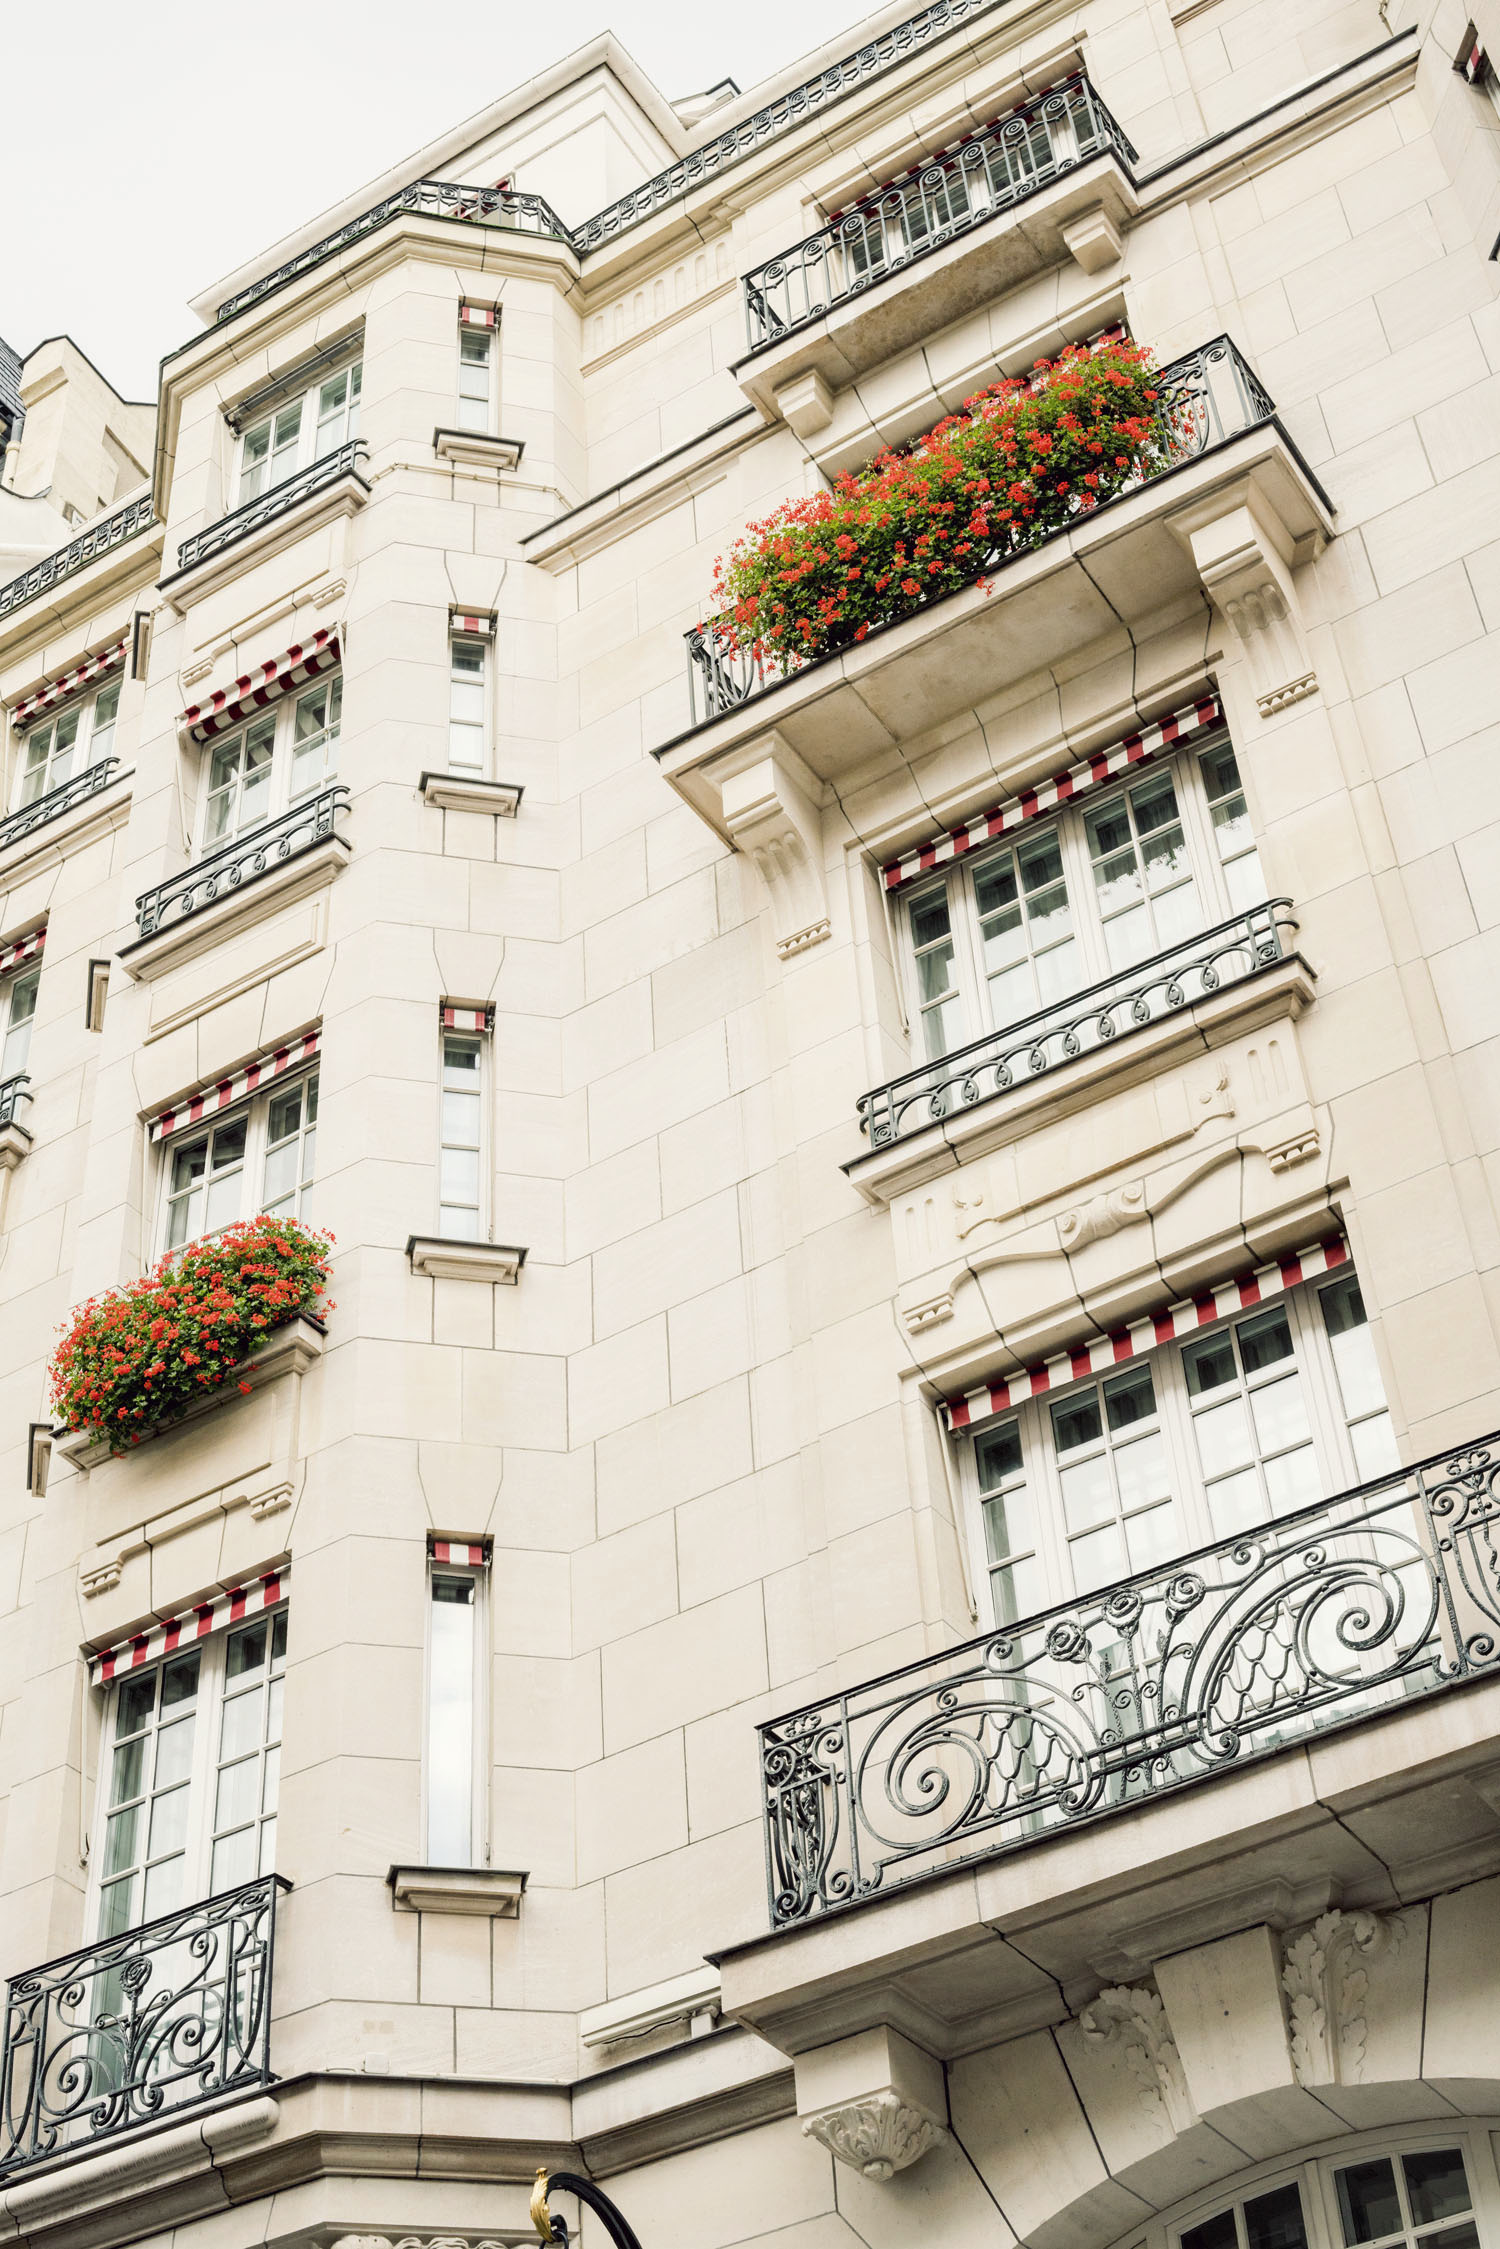 A stay at the historic Le Bristol Hotel Paris.